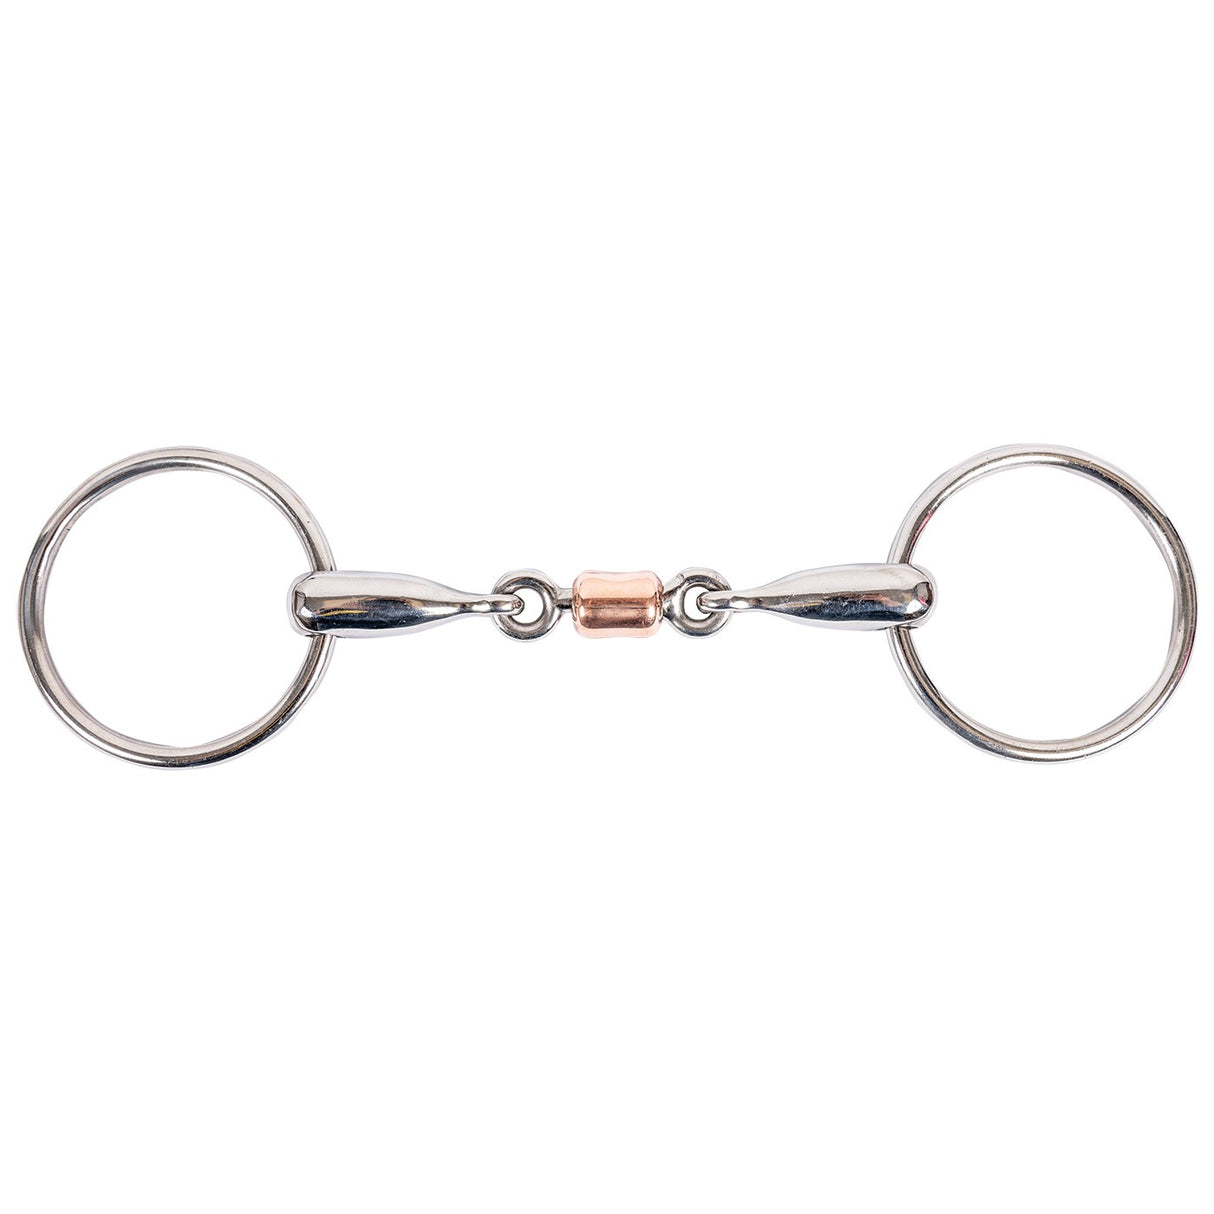 EvoEq Double Jointed Loose Ring Snaffle Bit W/ Copper Roller